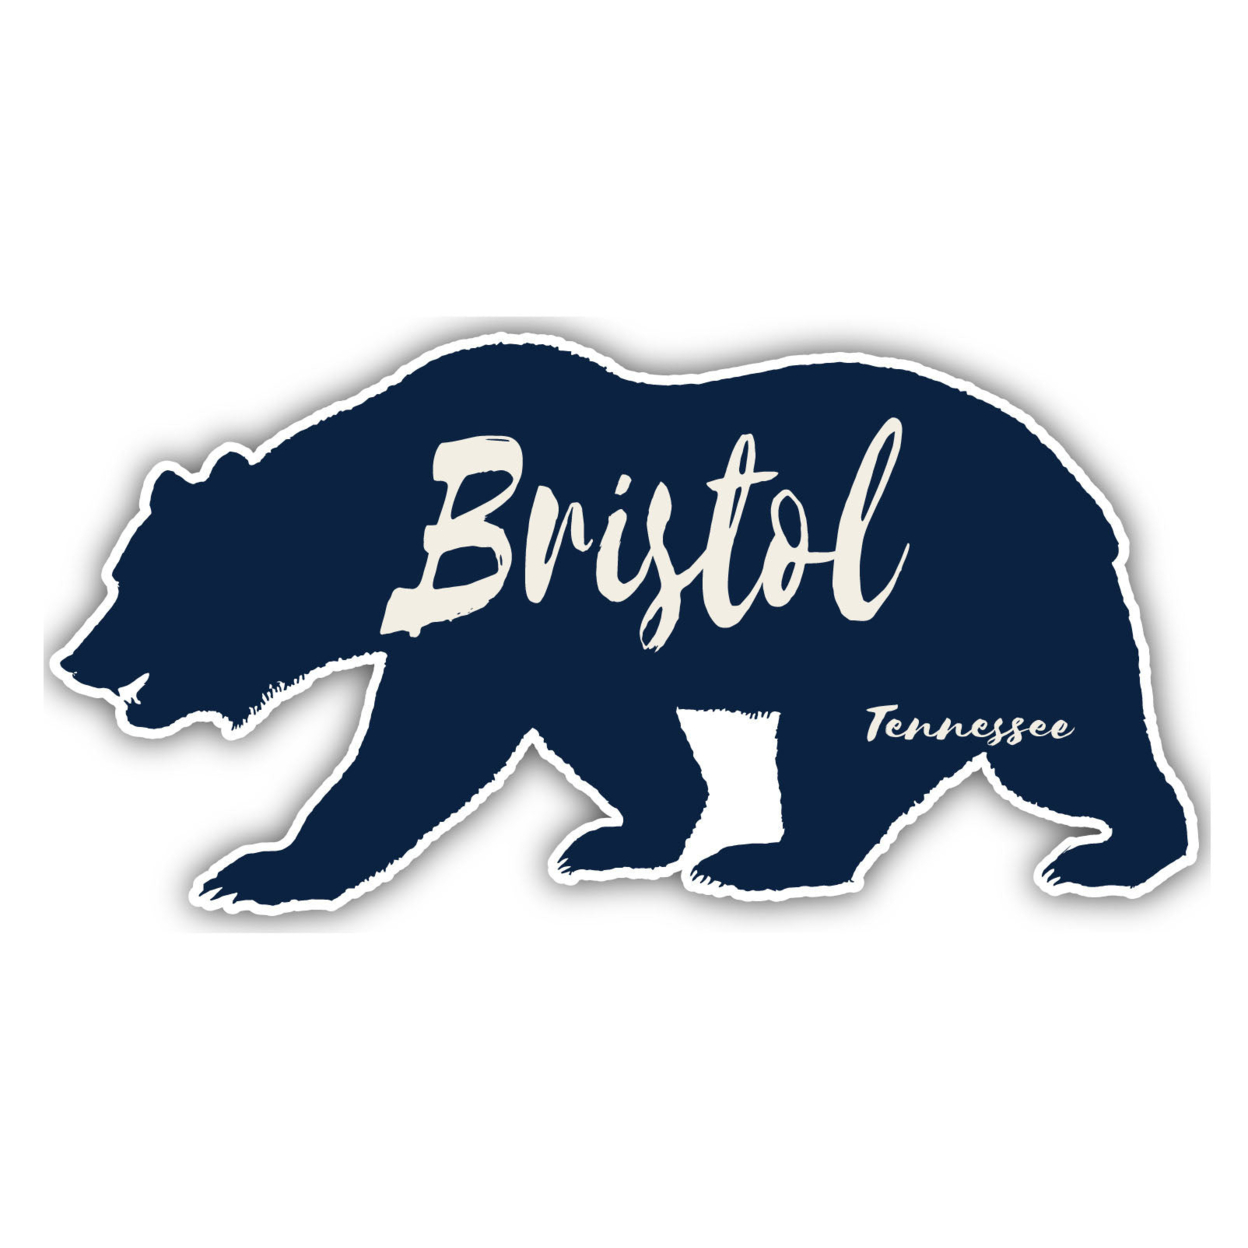 Bristol Tennessee Souvenir Decorative Stickers (Choose Theme And Size) - Single Unit, 8-Inch, Adventures Awaits